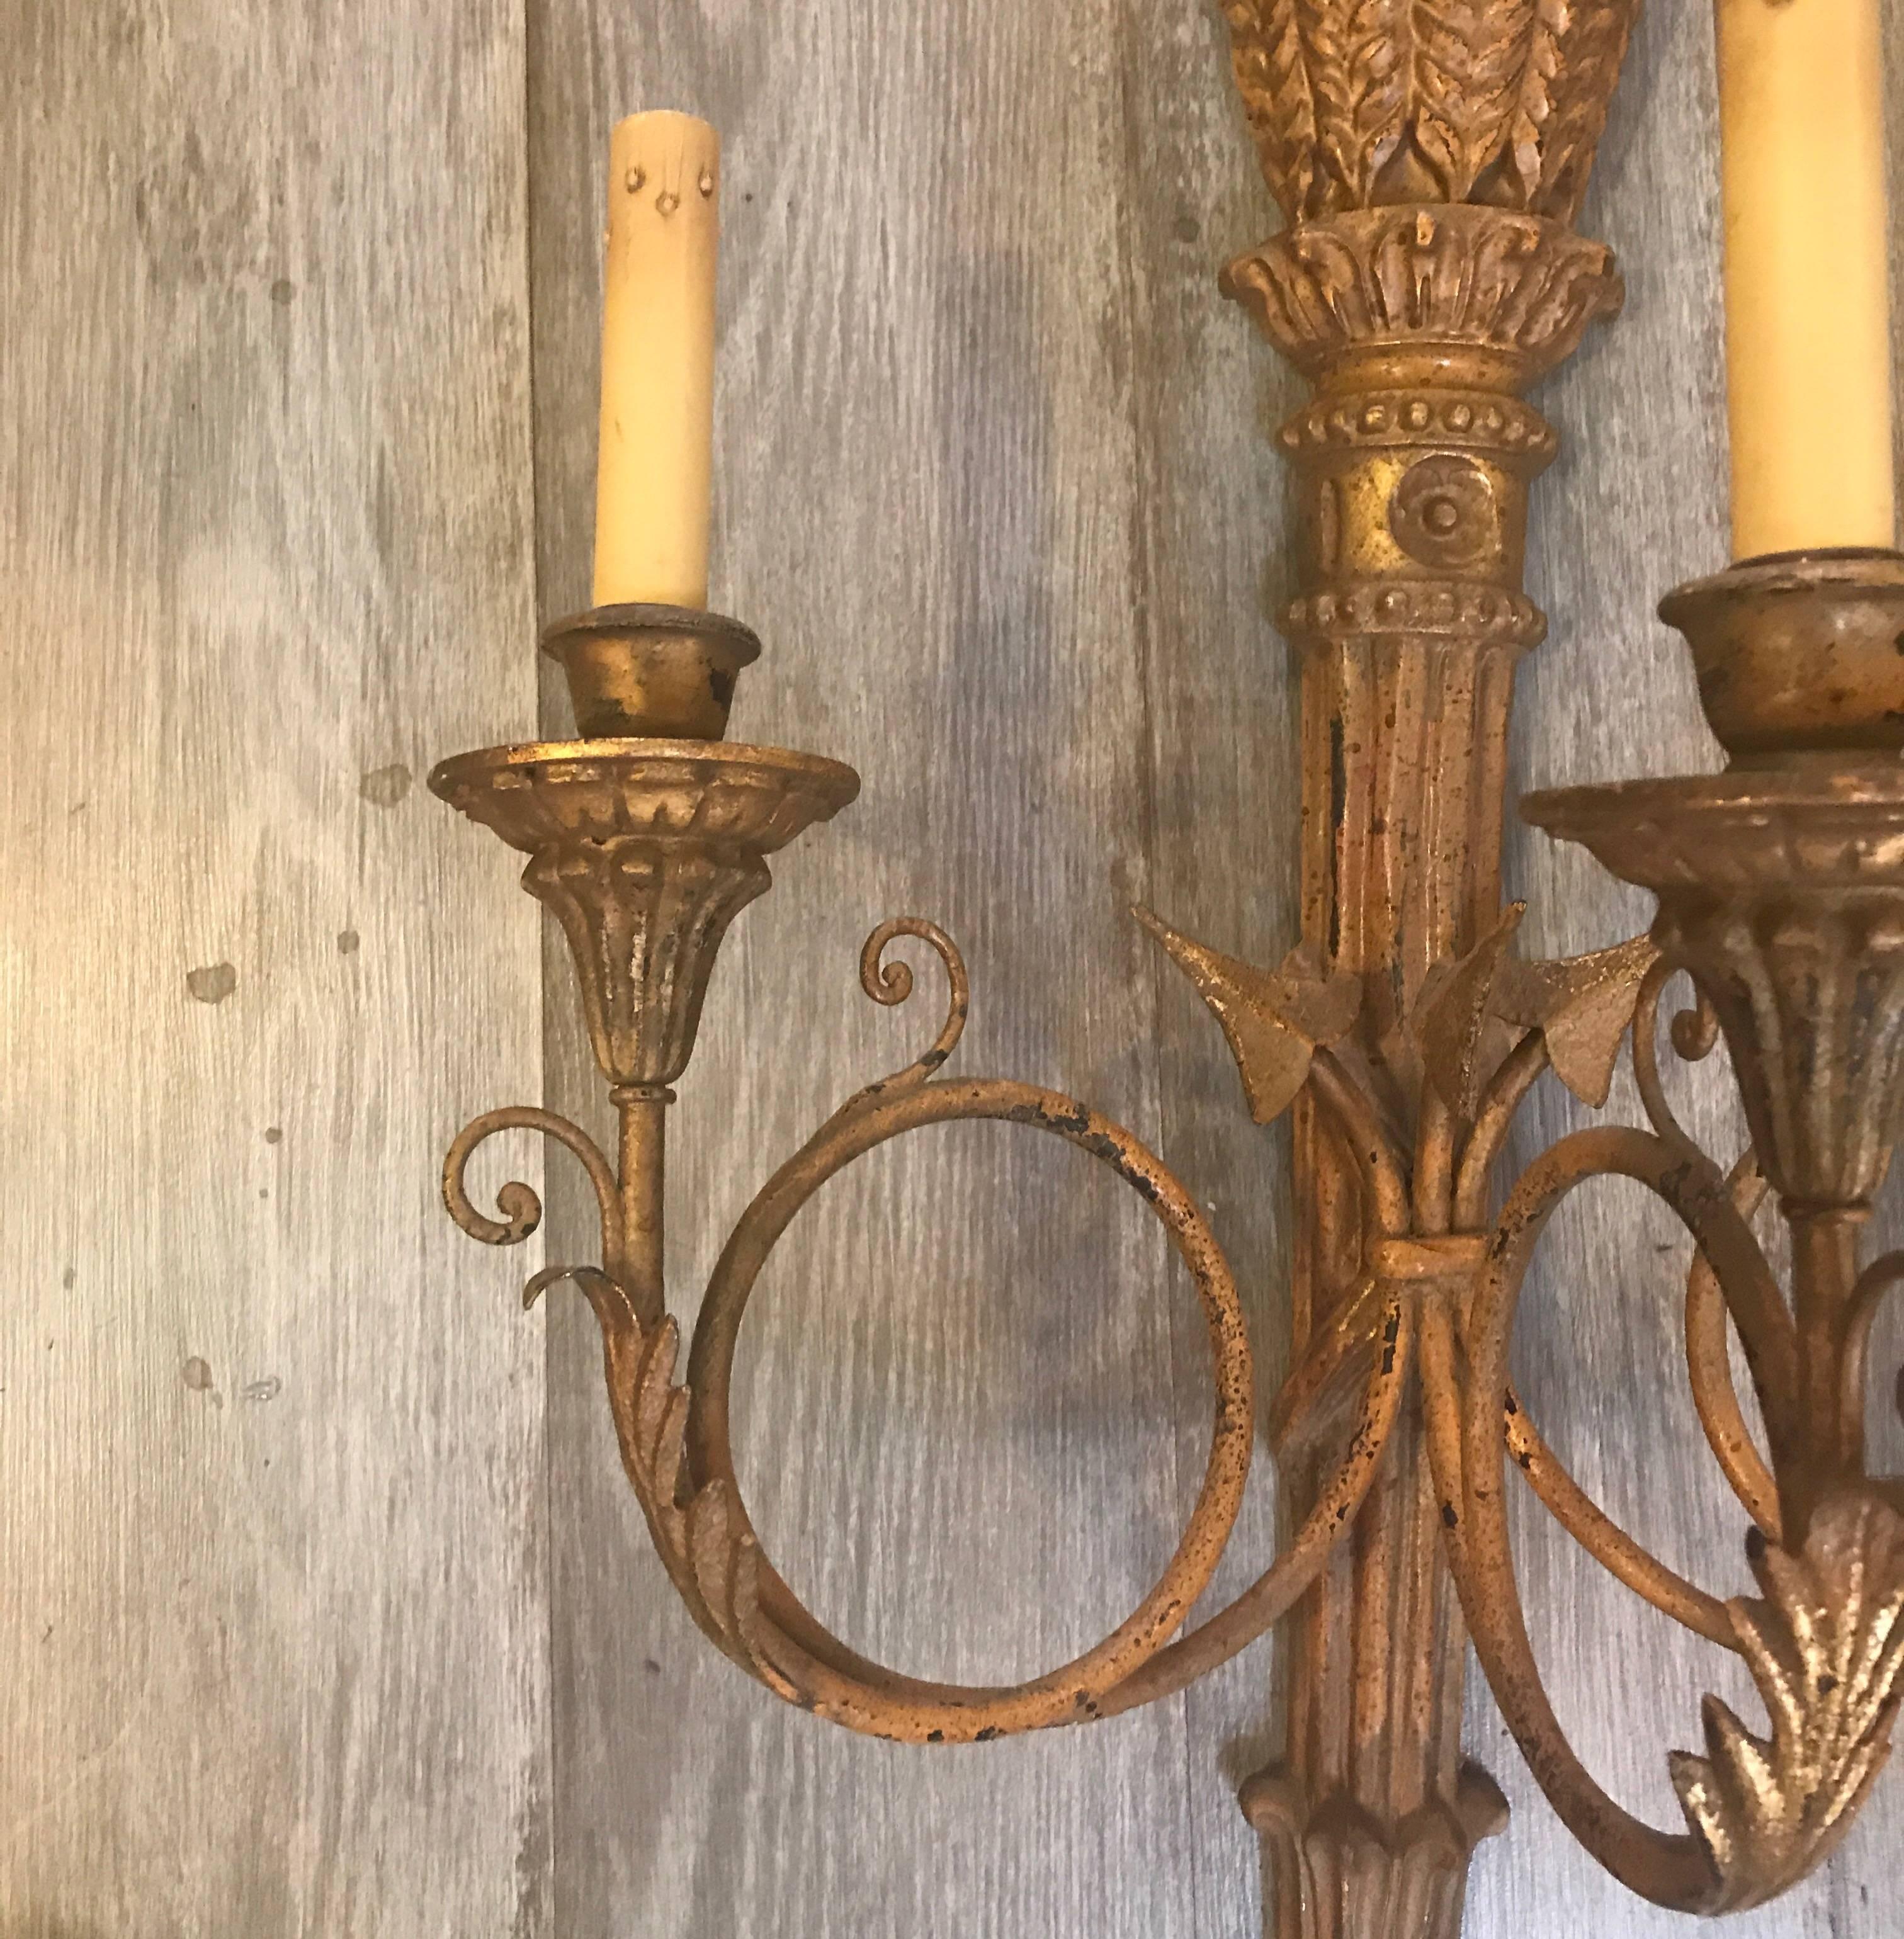 A pair of three-arm Italian giltwood sconces with French Horn style arms. The center column, with wheat top carving and reeded torch. The finish is weathered gilt.